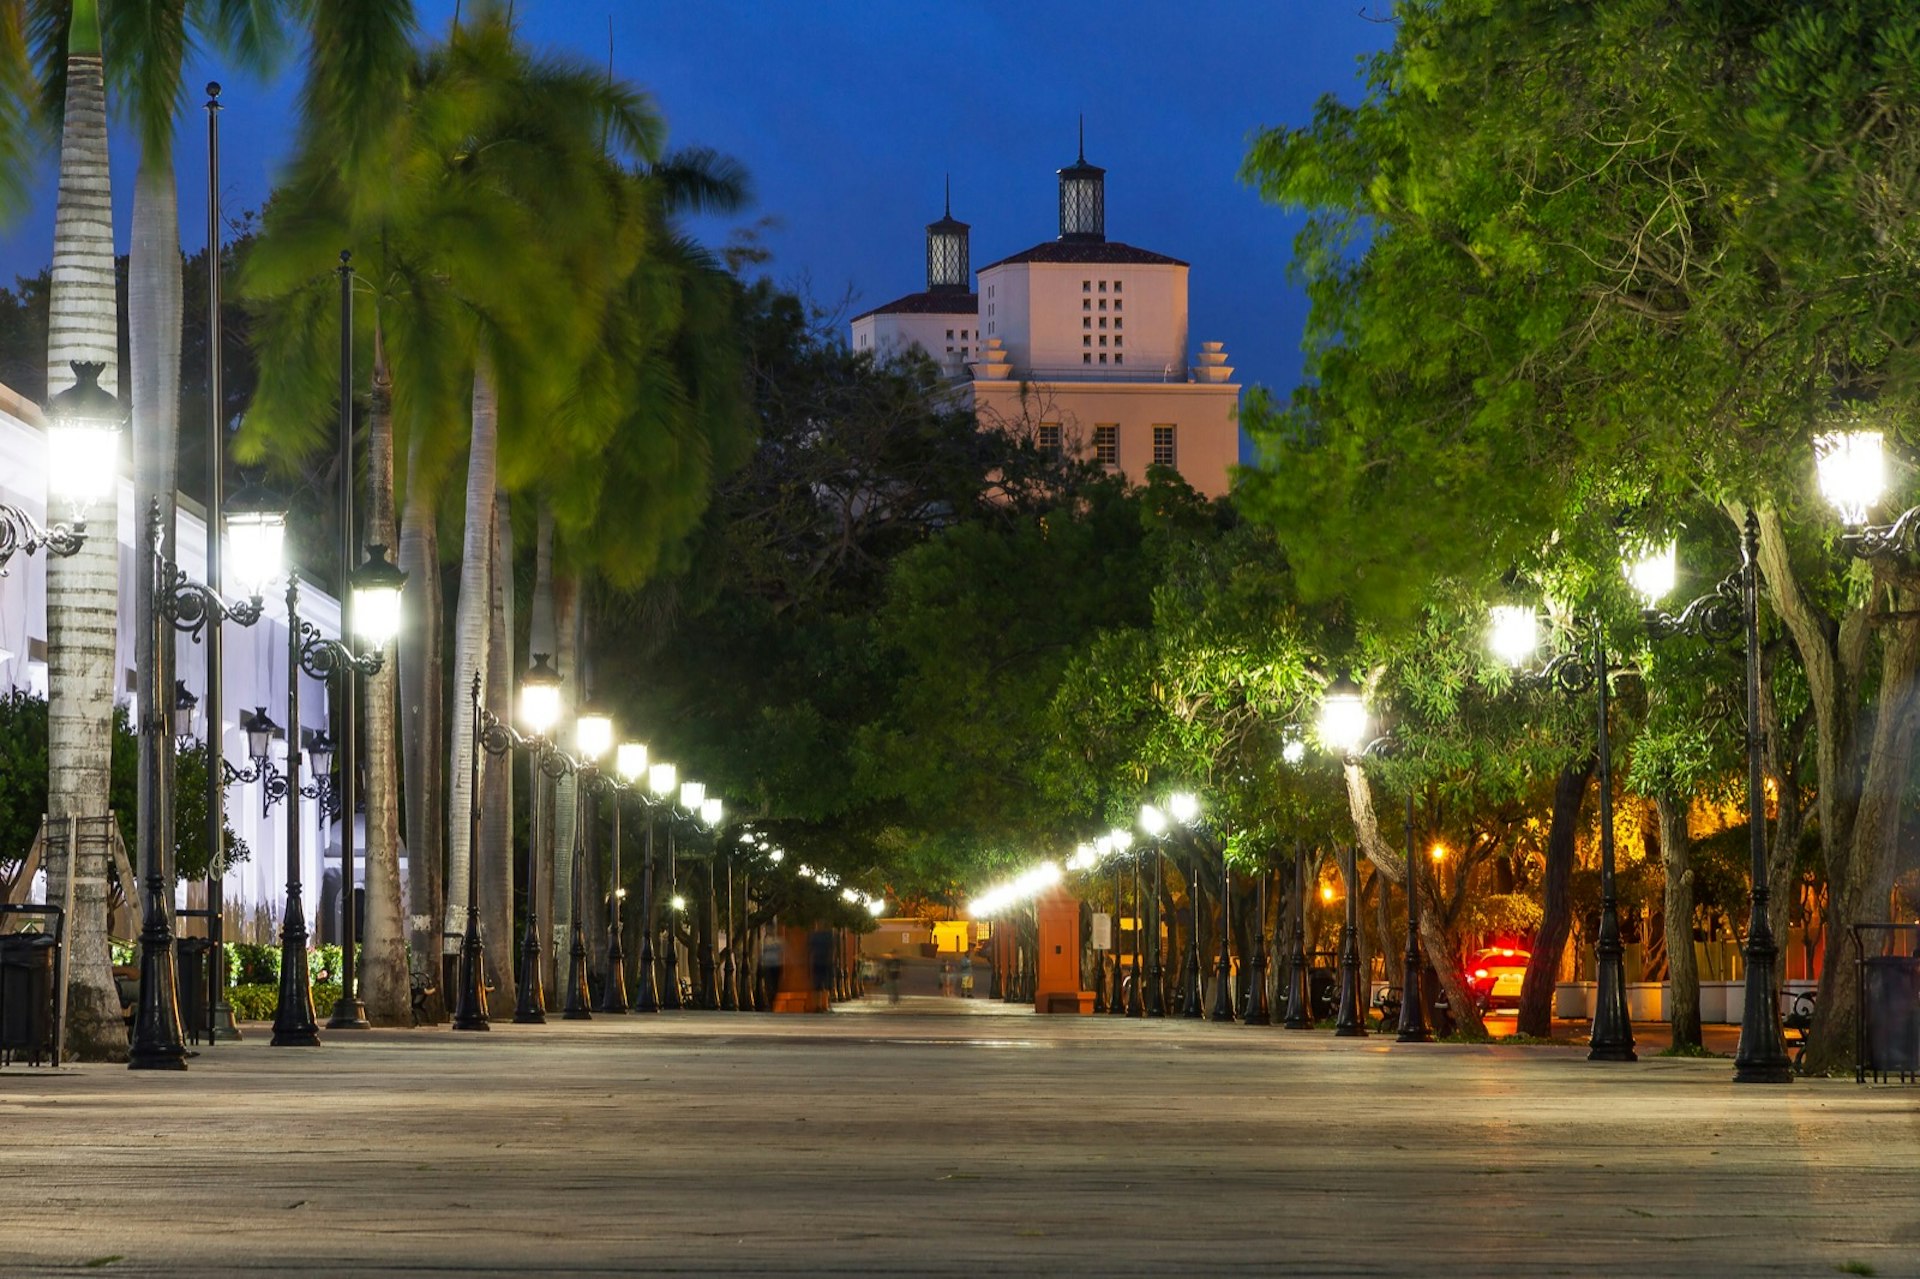 Decorative cast iron street lamps - set beneath lines of trees - flank both sides of a cobbled street of Paseo de la Princesa in the old city; San Juan nightlife spills onto these streets come dark